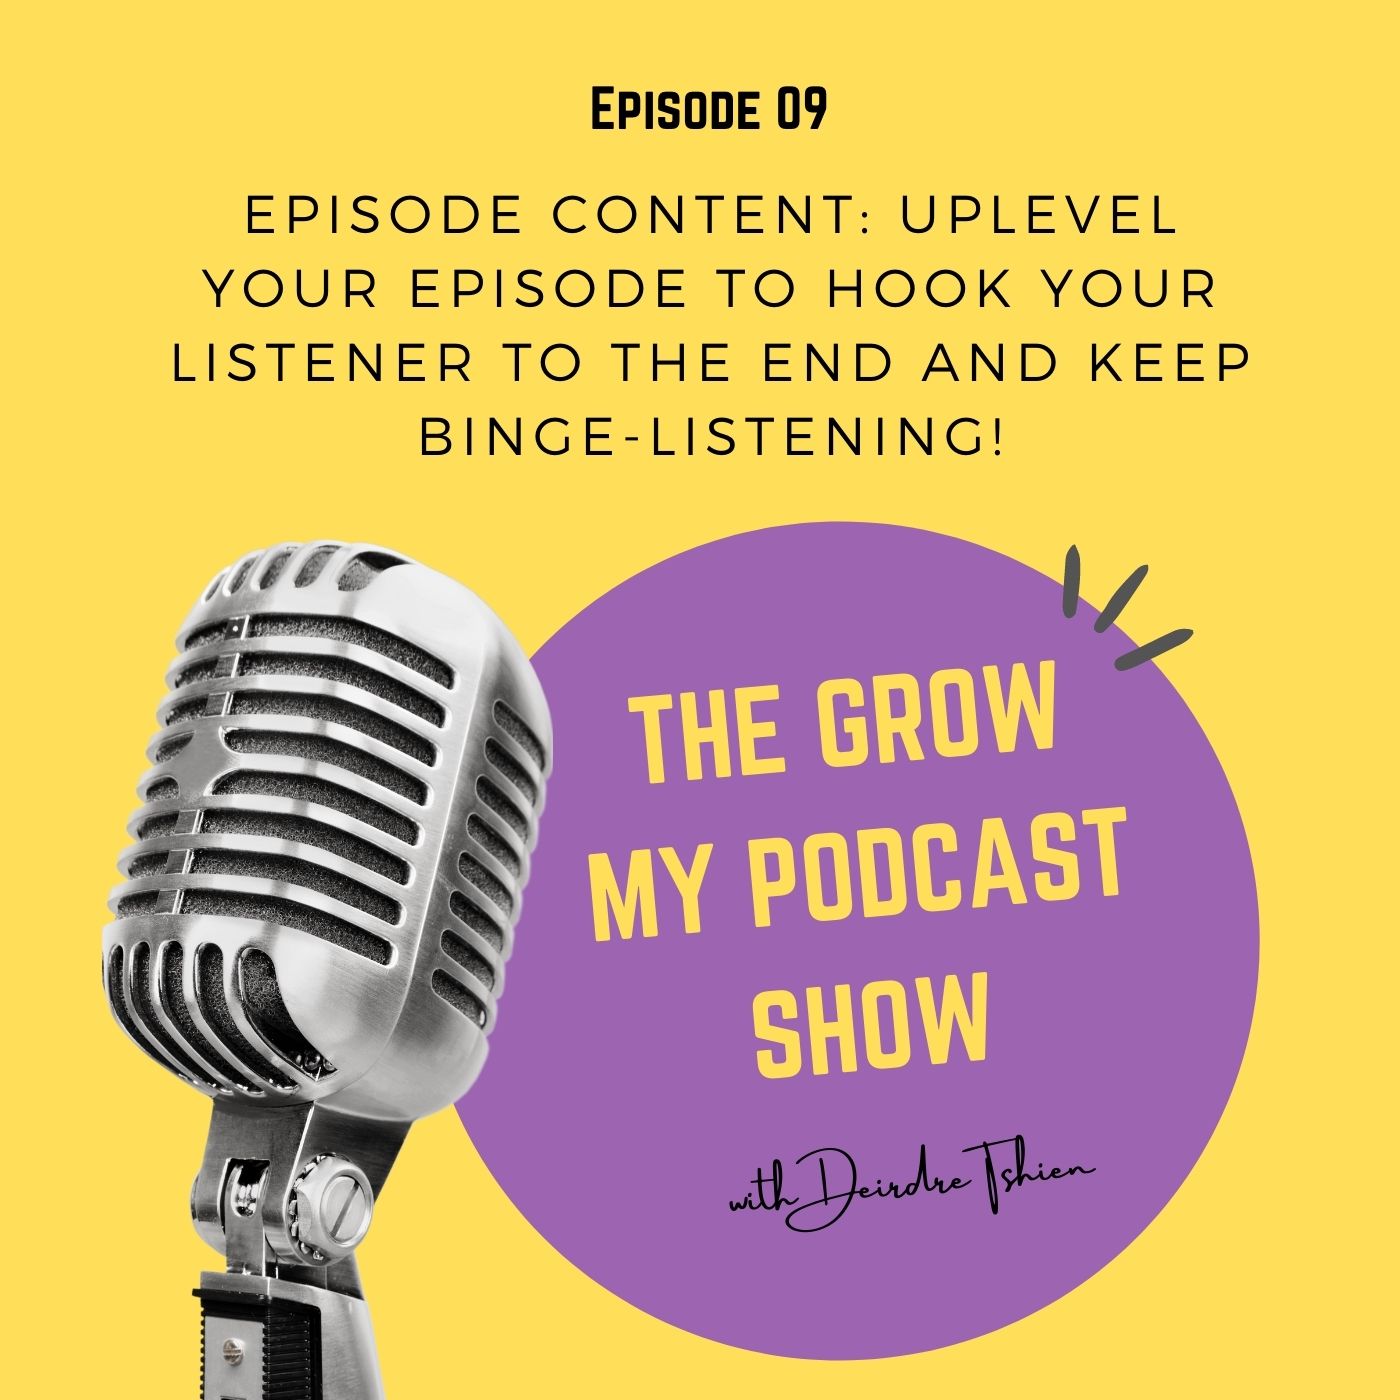 Episode Content: Uplevel Your Episode to Hook your Listener to the End and Keep Binge-Listening! Image